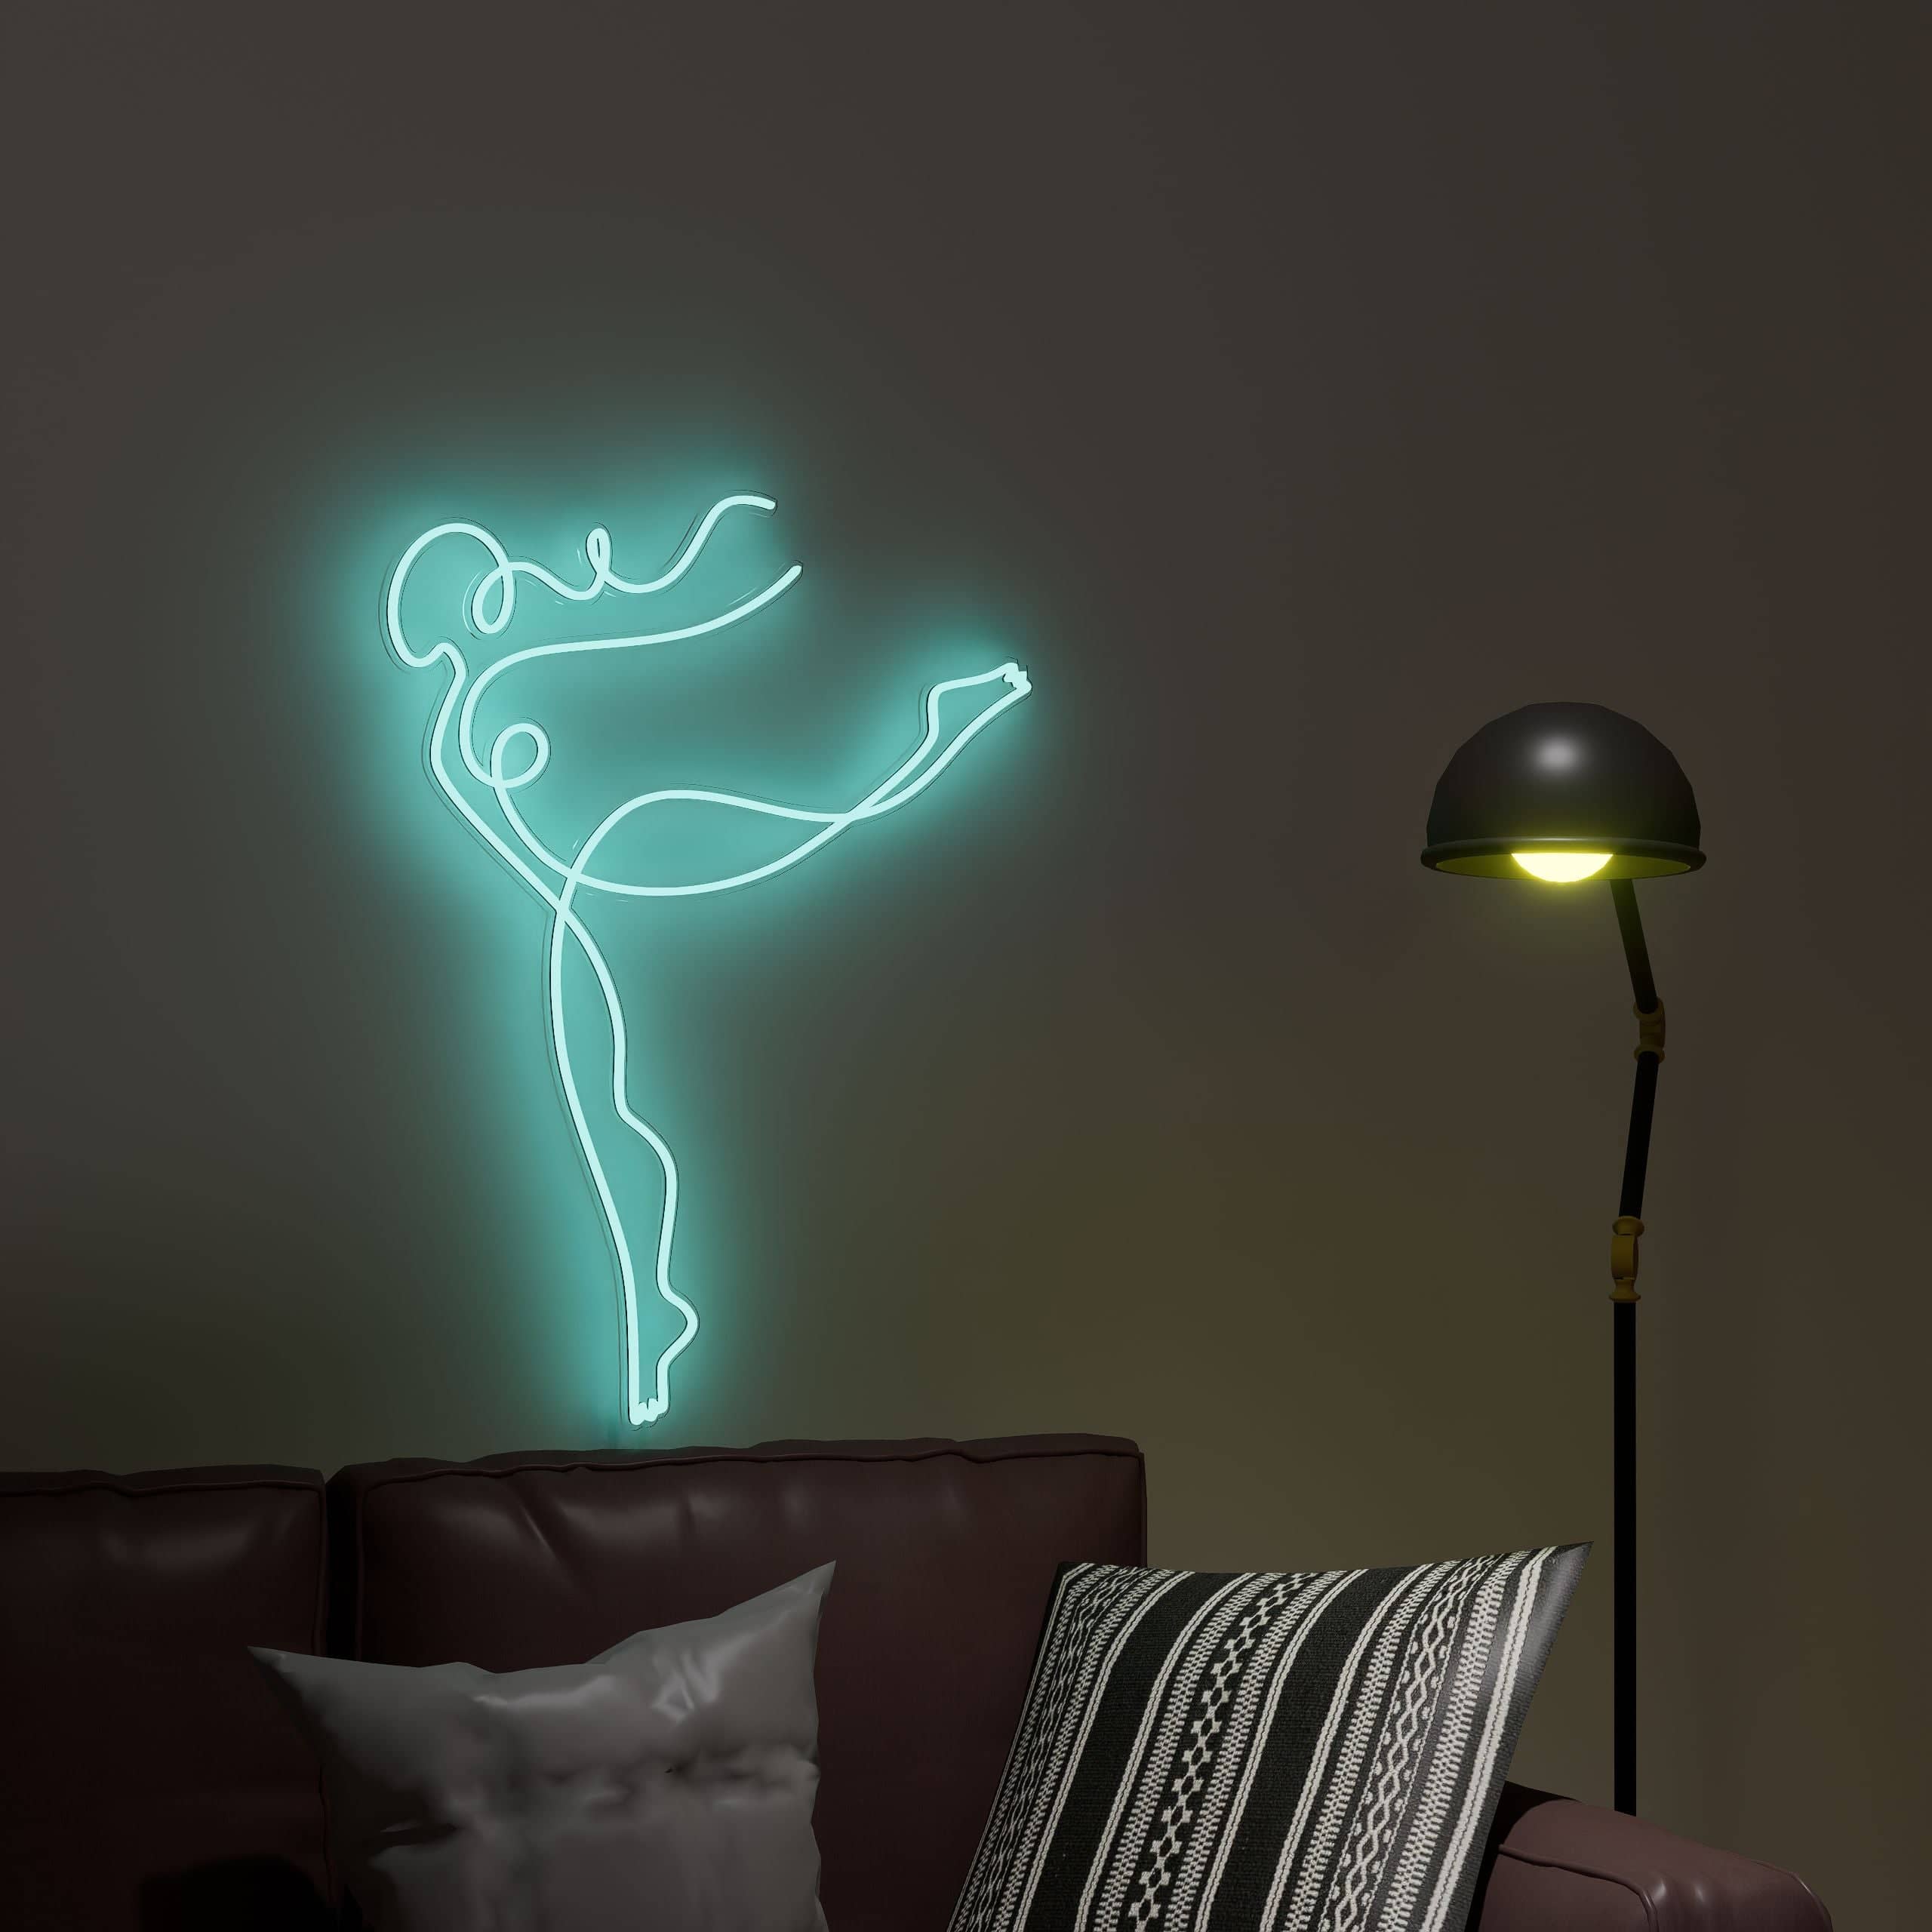 Dance neon sign adds artistic flair to children's room decor